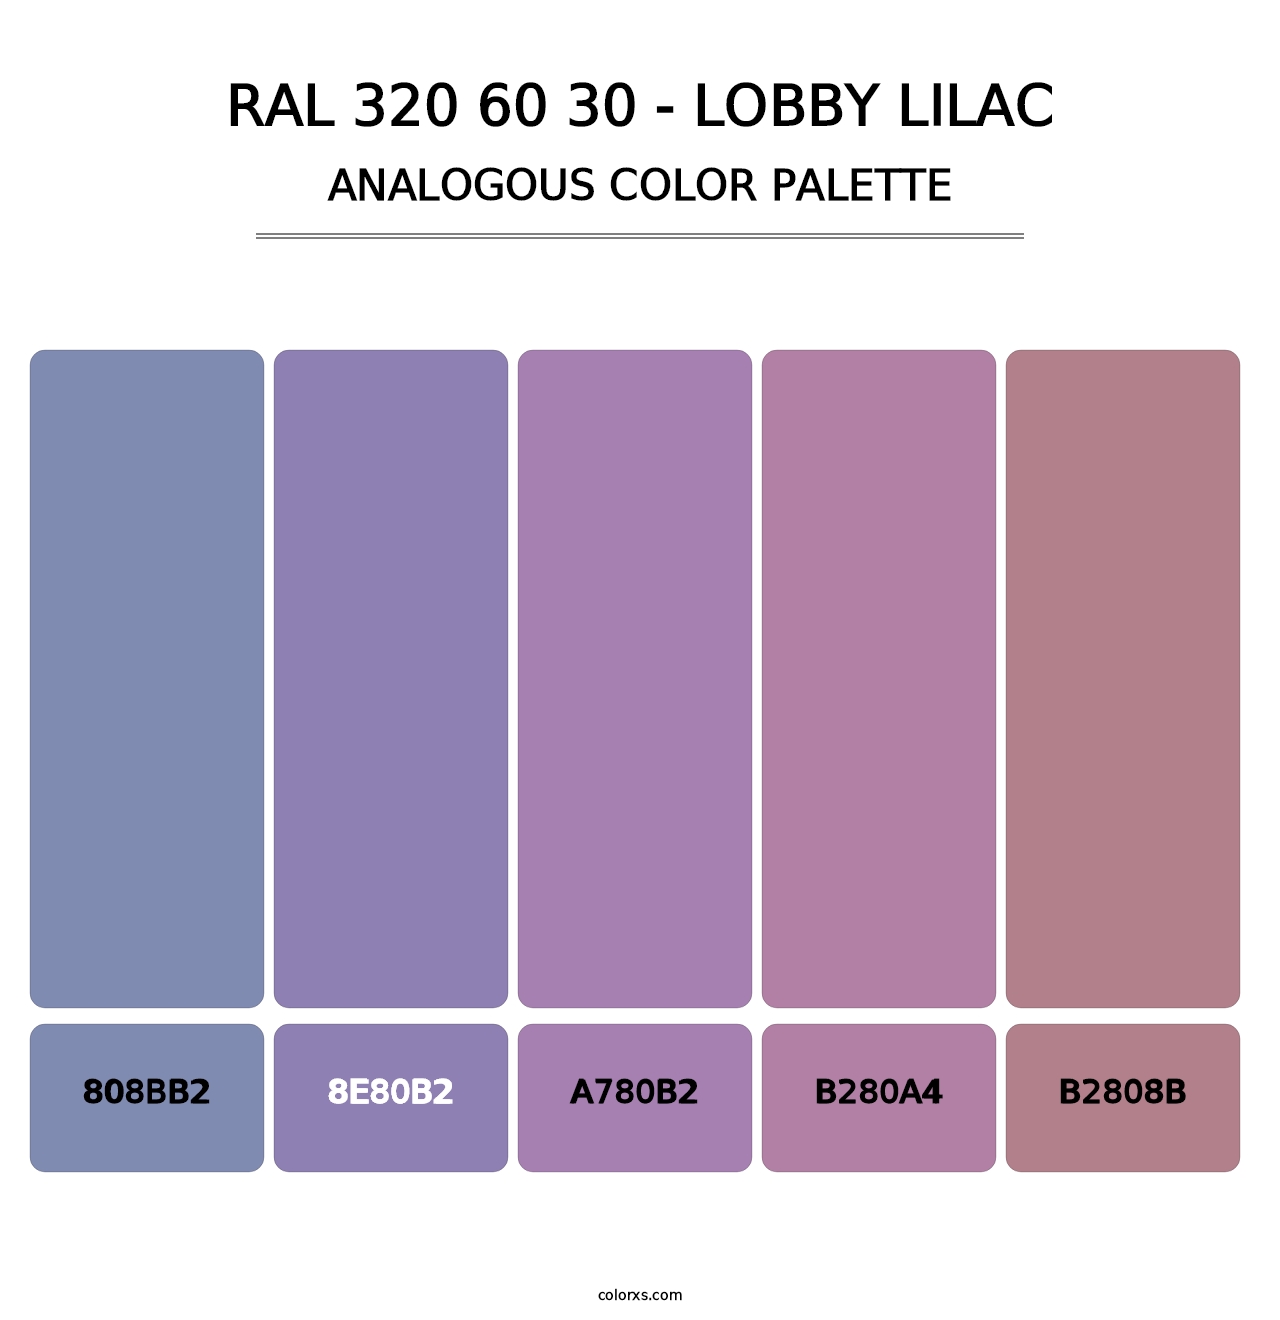 RAL 320 60 30 - Lobby Lilac - Analogous Color Palette